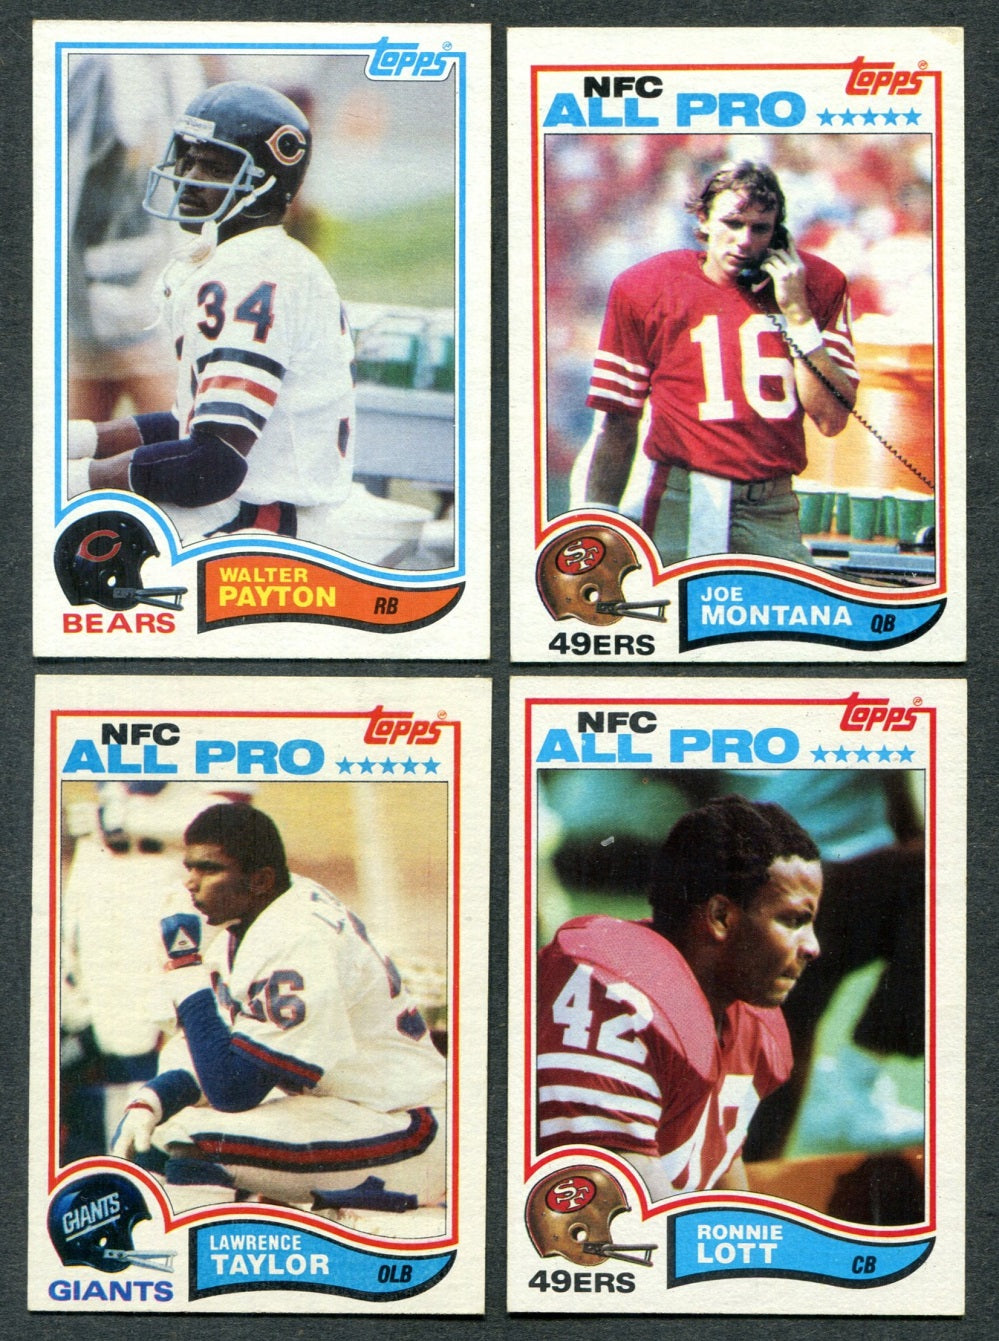 1982 Topps Football Complete Set EX/MT NM (528) (23-306)